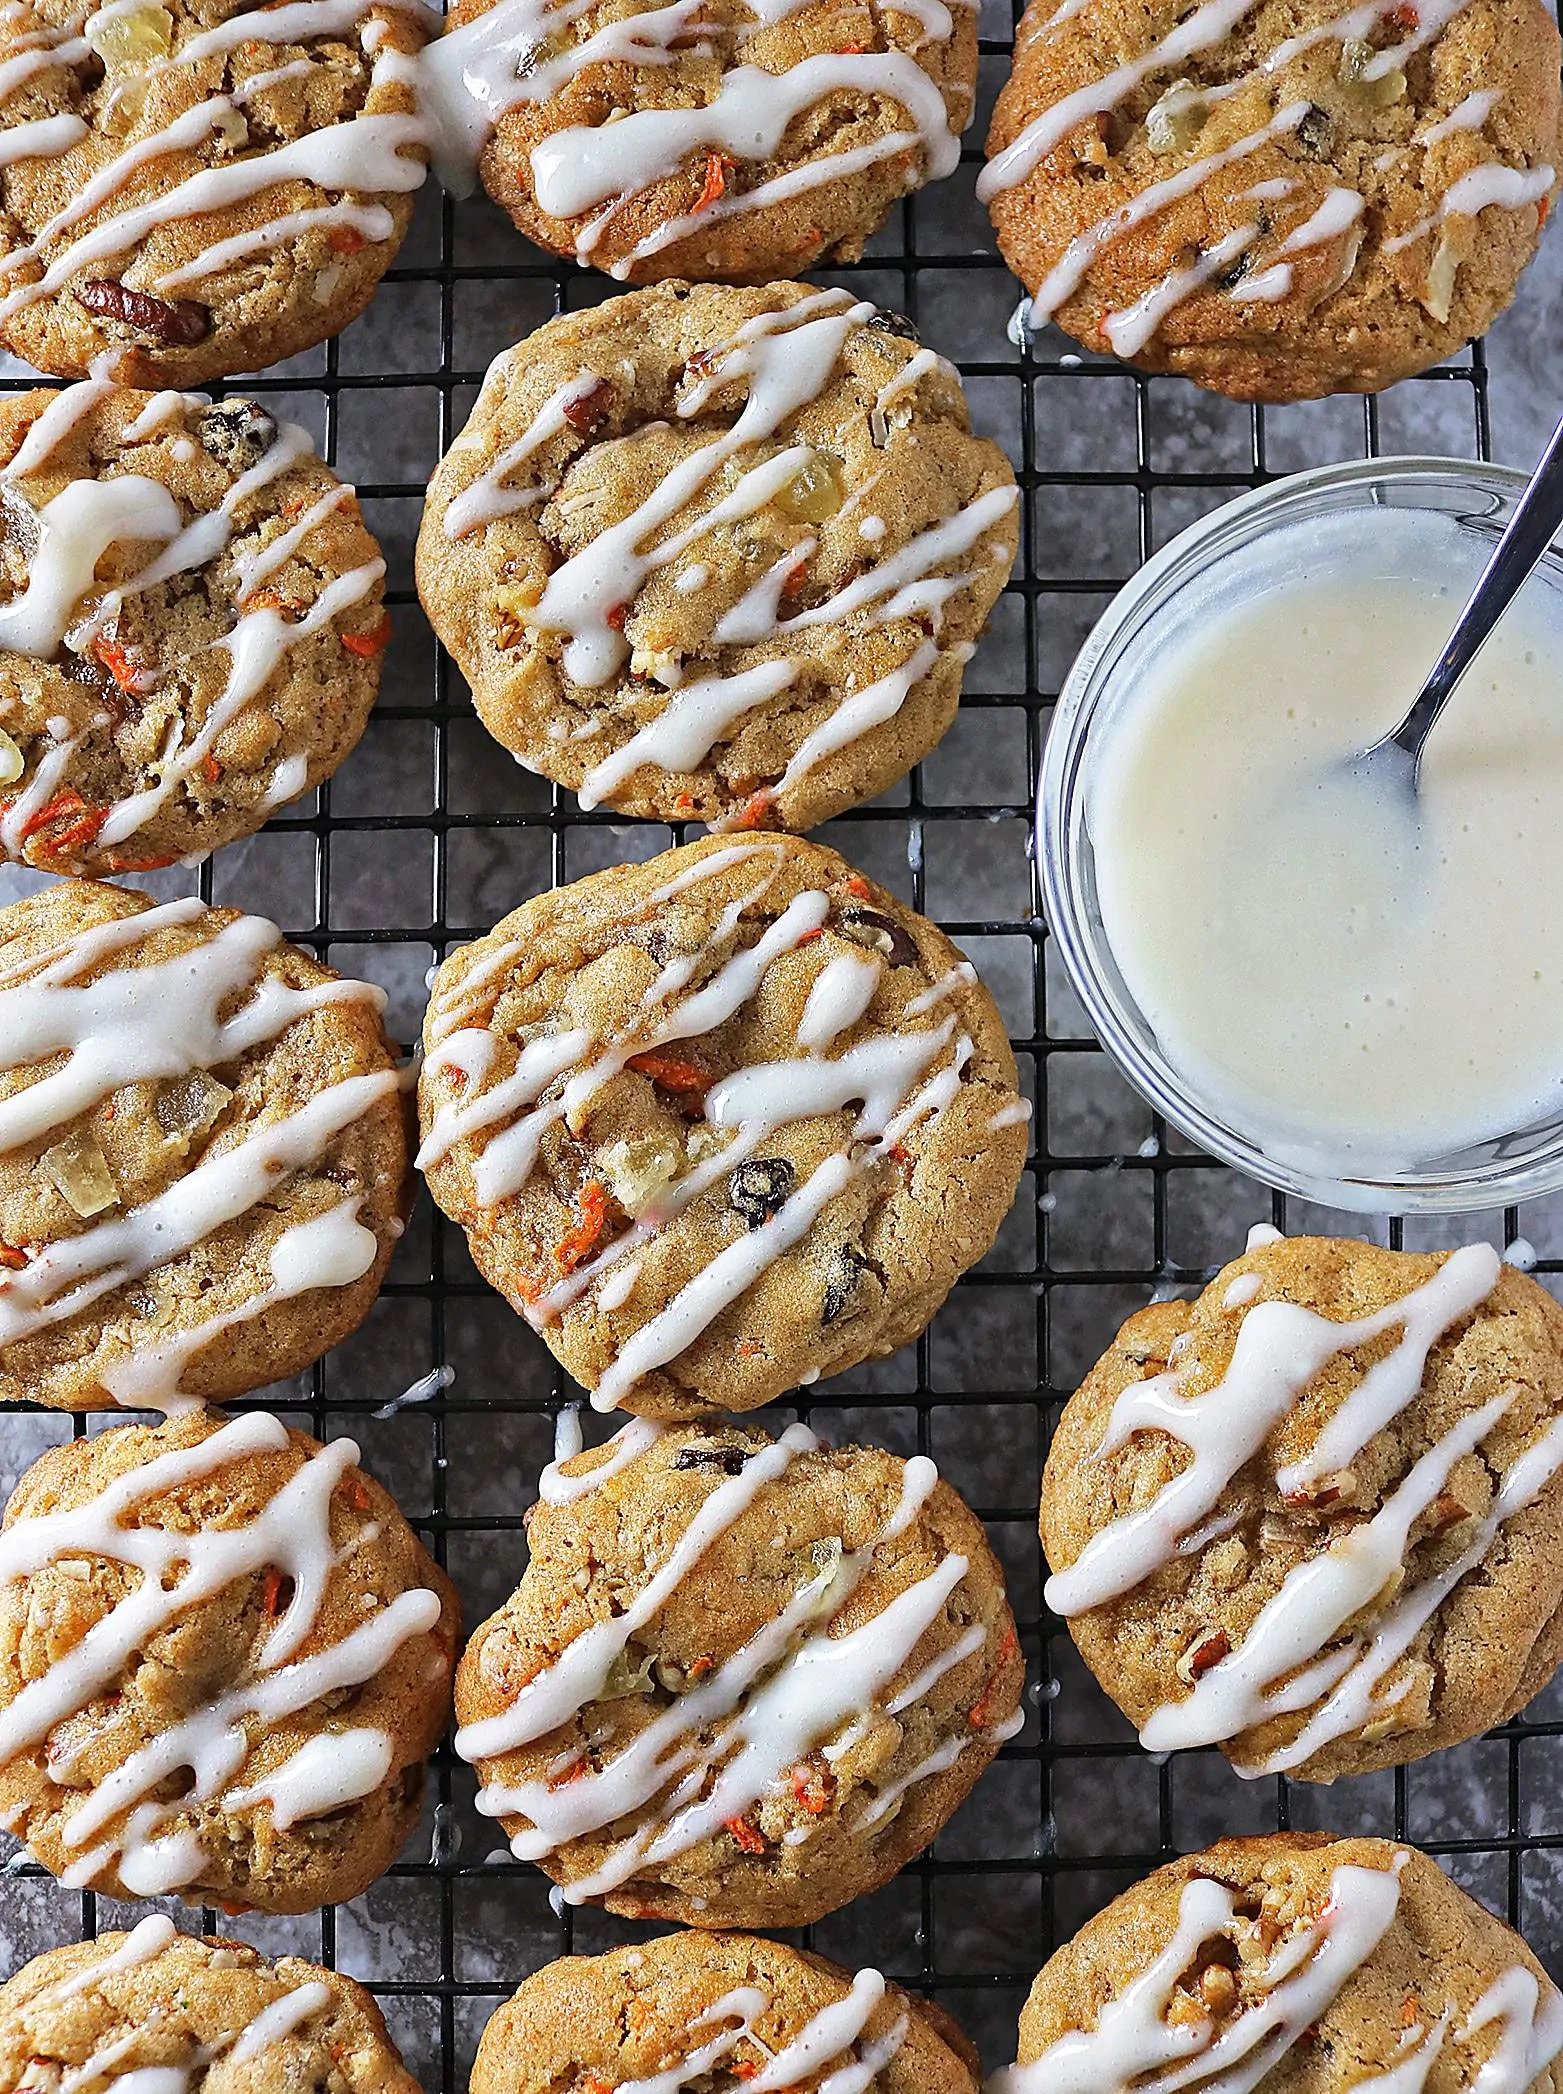 Chock full of carrots, walnuts, raisins, cardamom, cinnamon and candied pineapple, these Carrot Cake Cookies with Cream Cheese Drizzle are heavy on flavor.